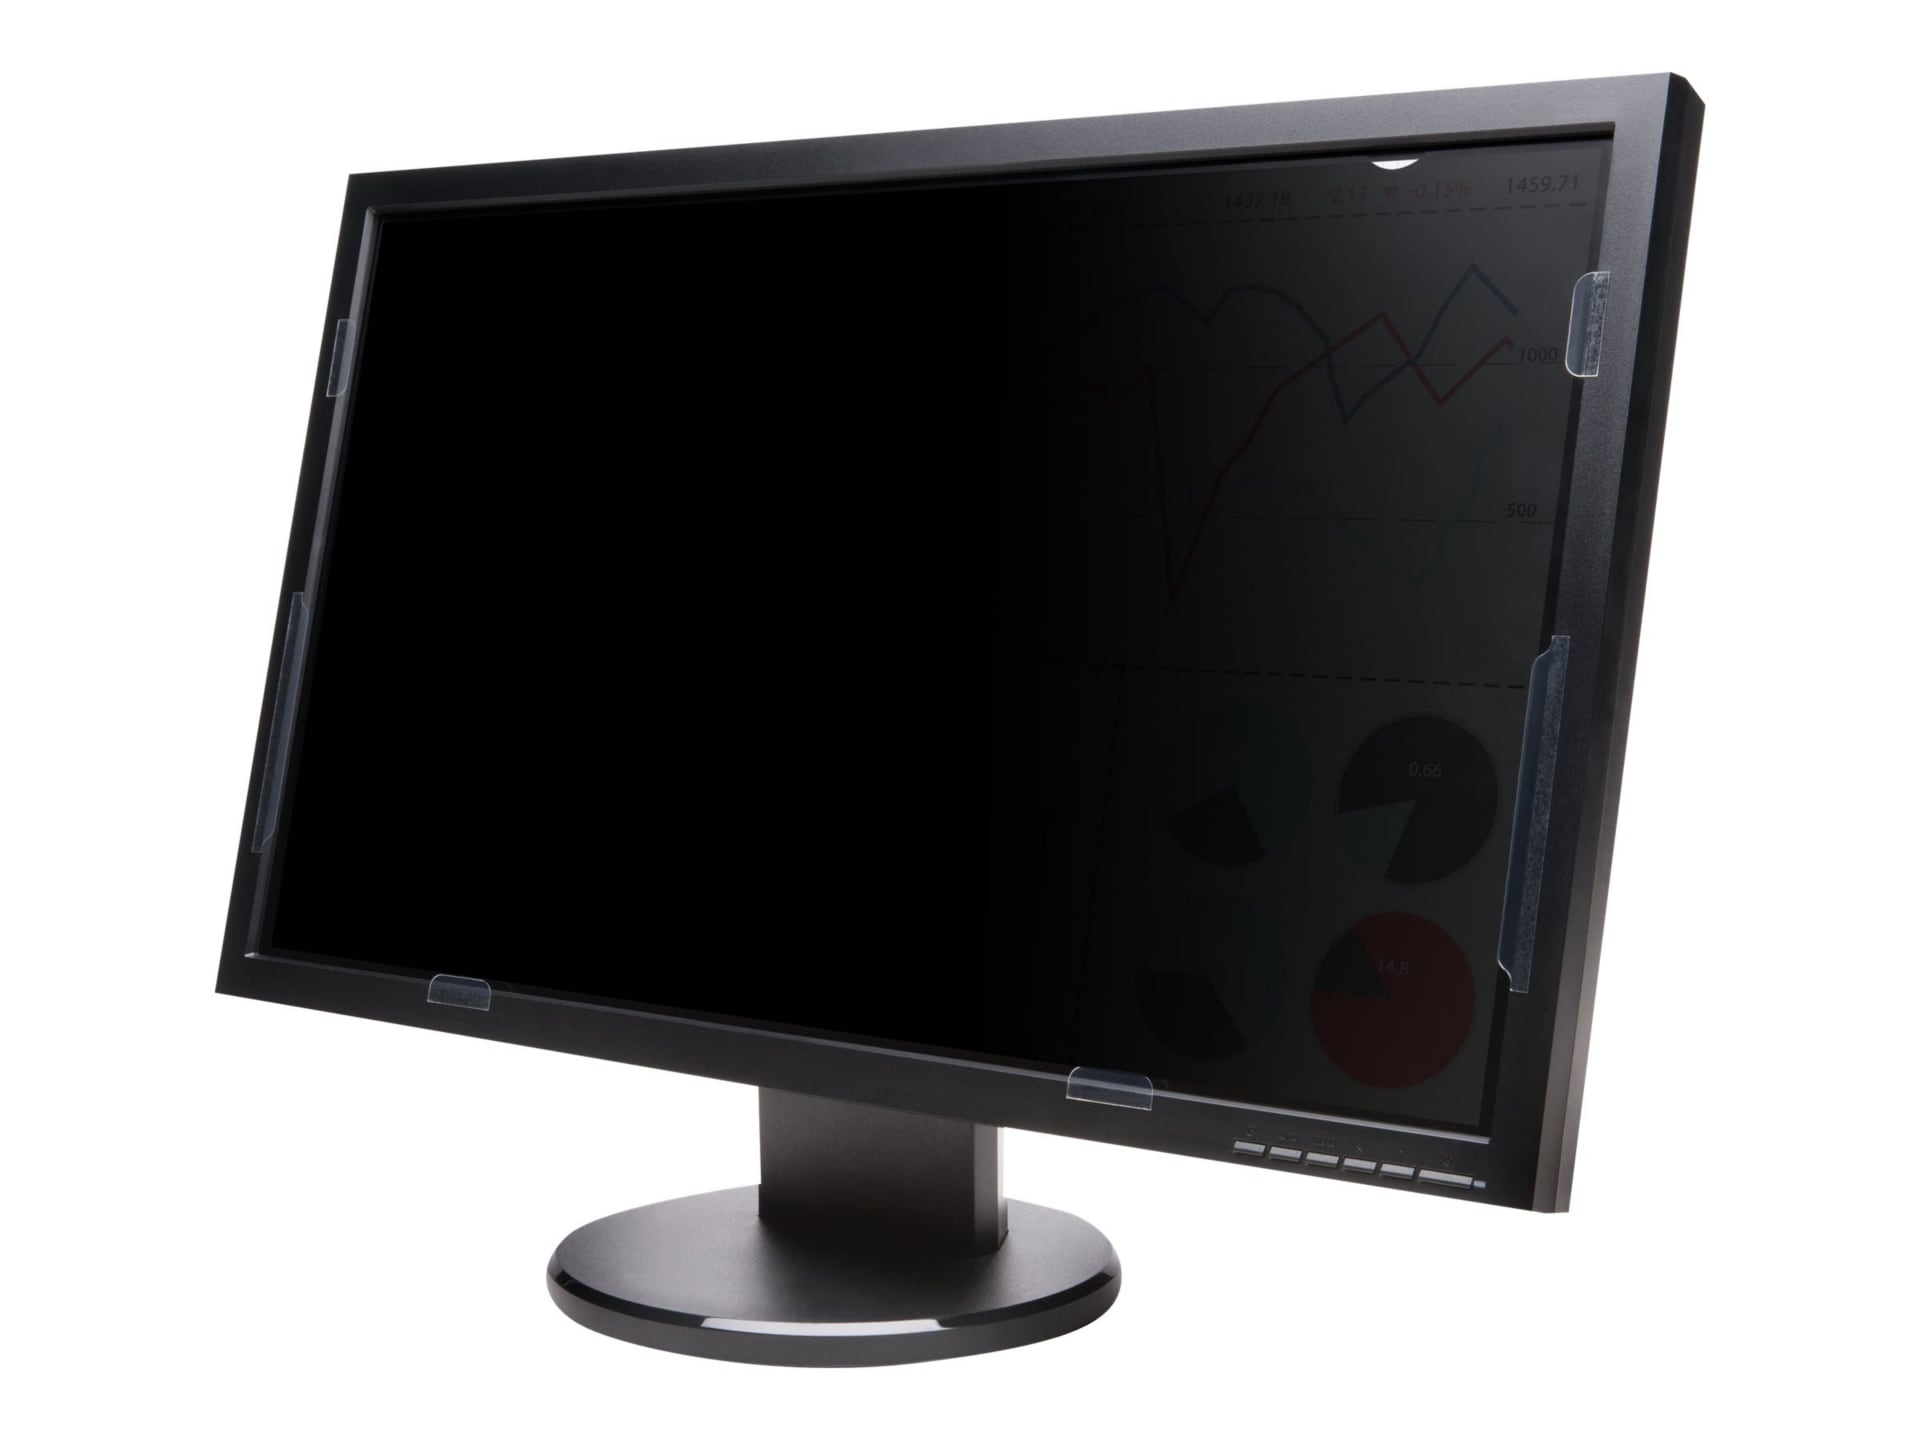 Kensington FP236W9 Privacy Screen for 23,6" Monitors - display privacy filt